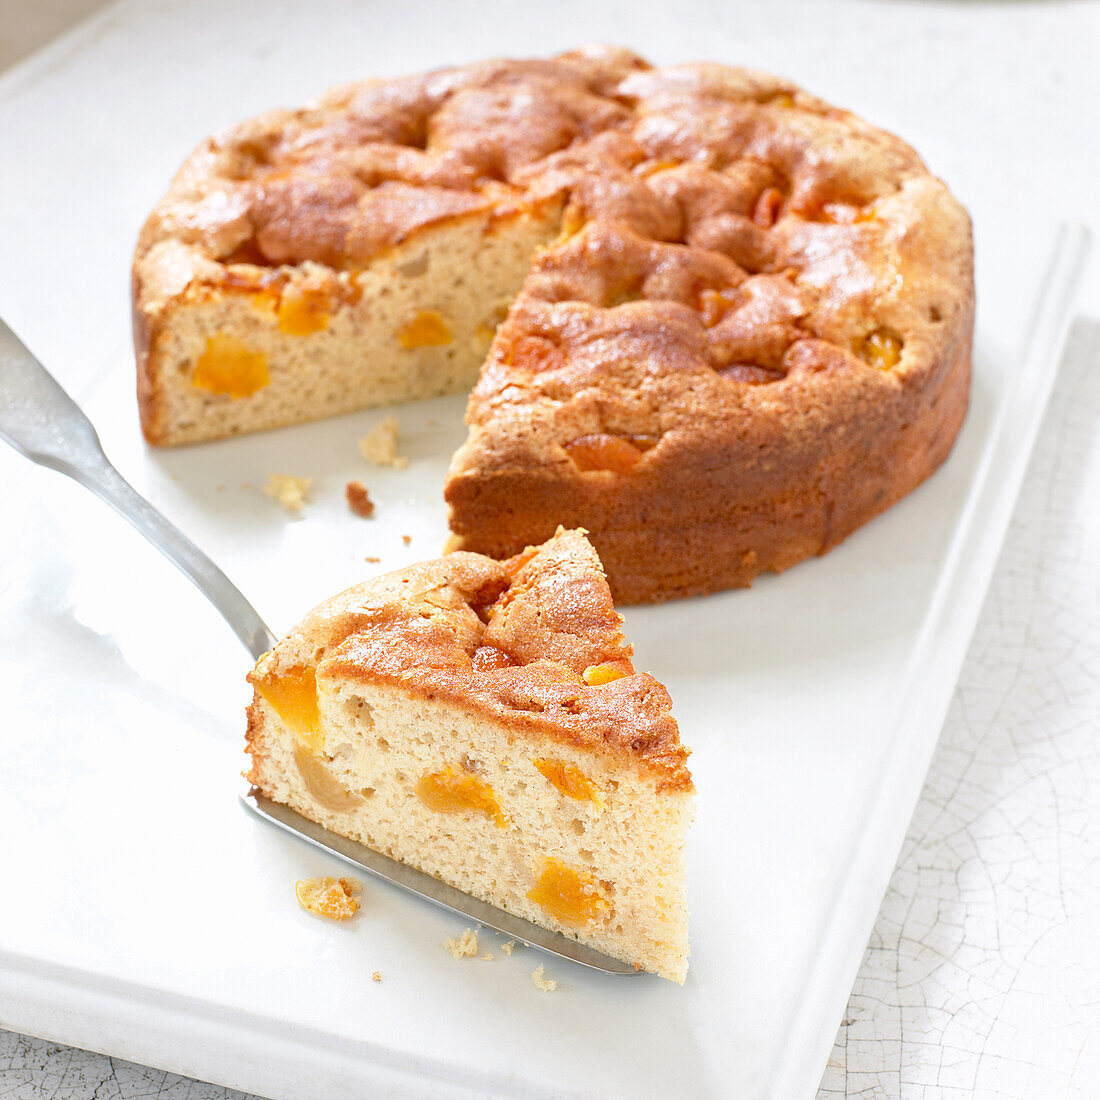 Apricot cake with single slice cut away